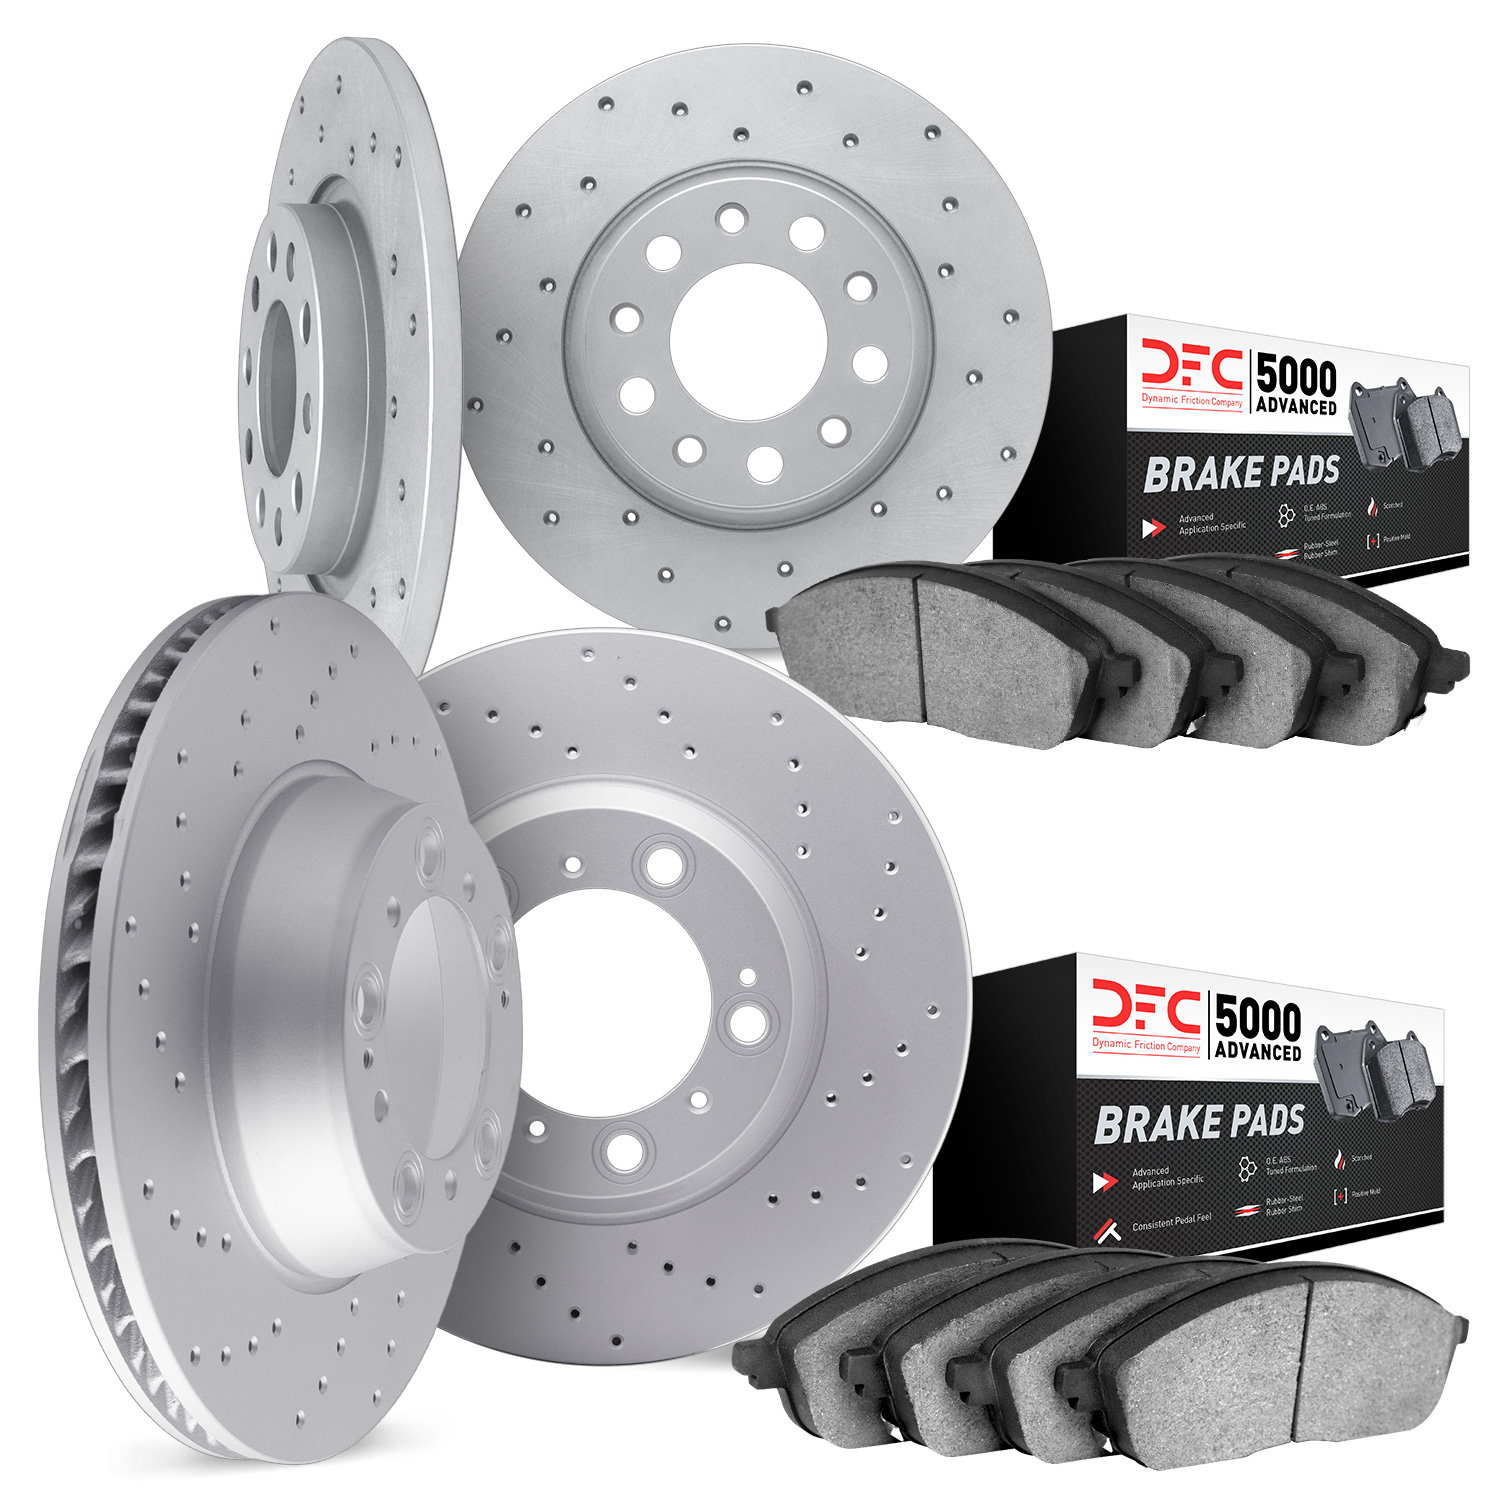 2704-54033 Geoperformance Drilled Brake Rotors with Active Performance Pads Kit, 2013-2017 Ford/Lincoln/Mercury/Mazda, Position: